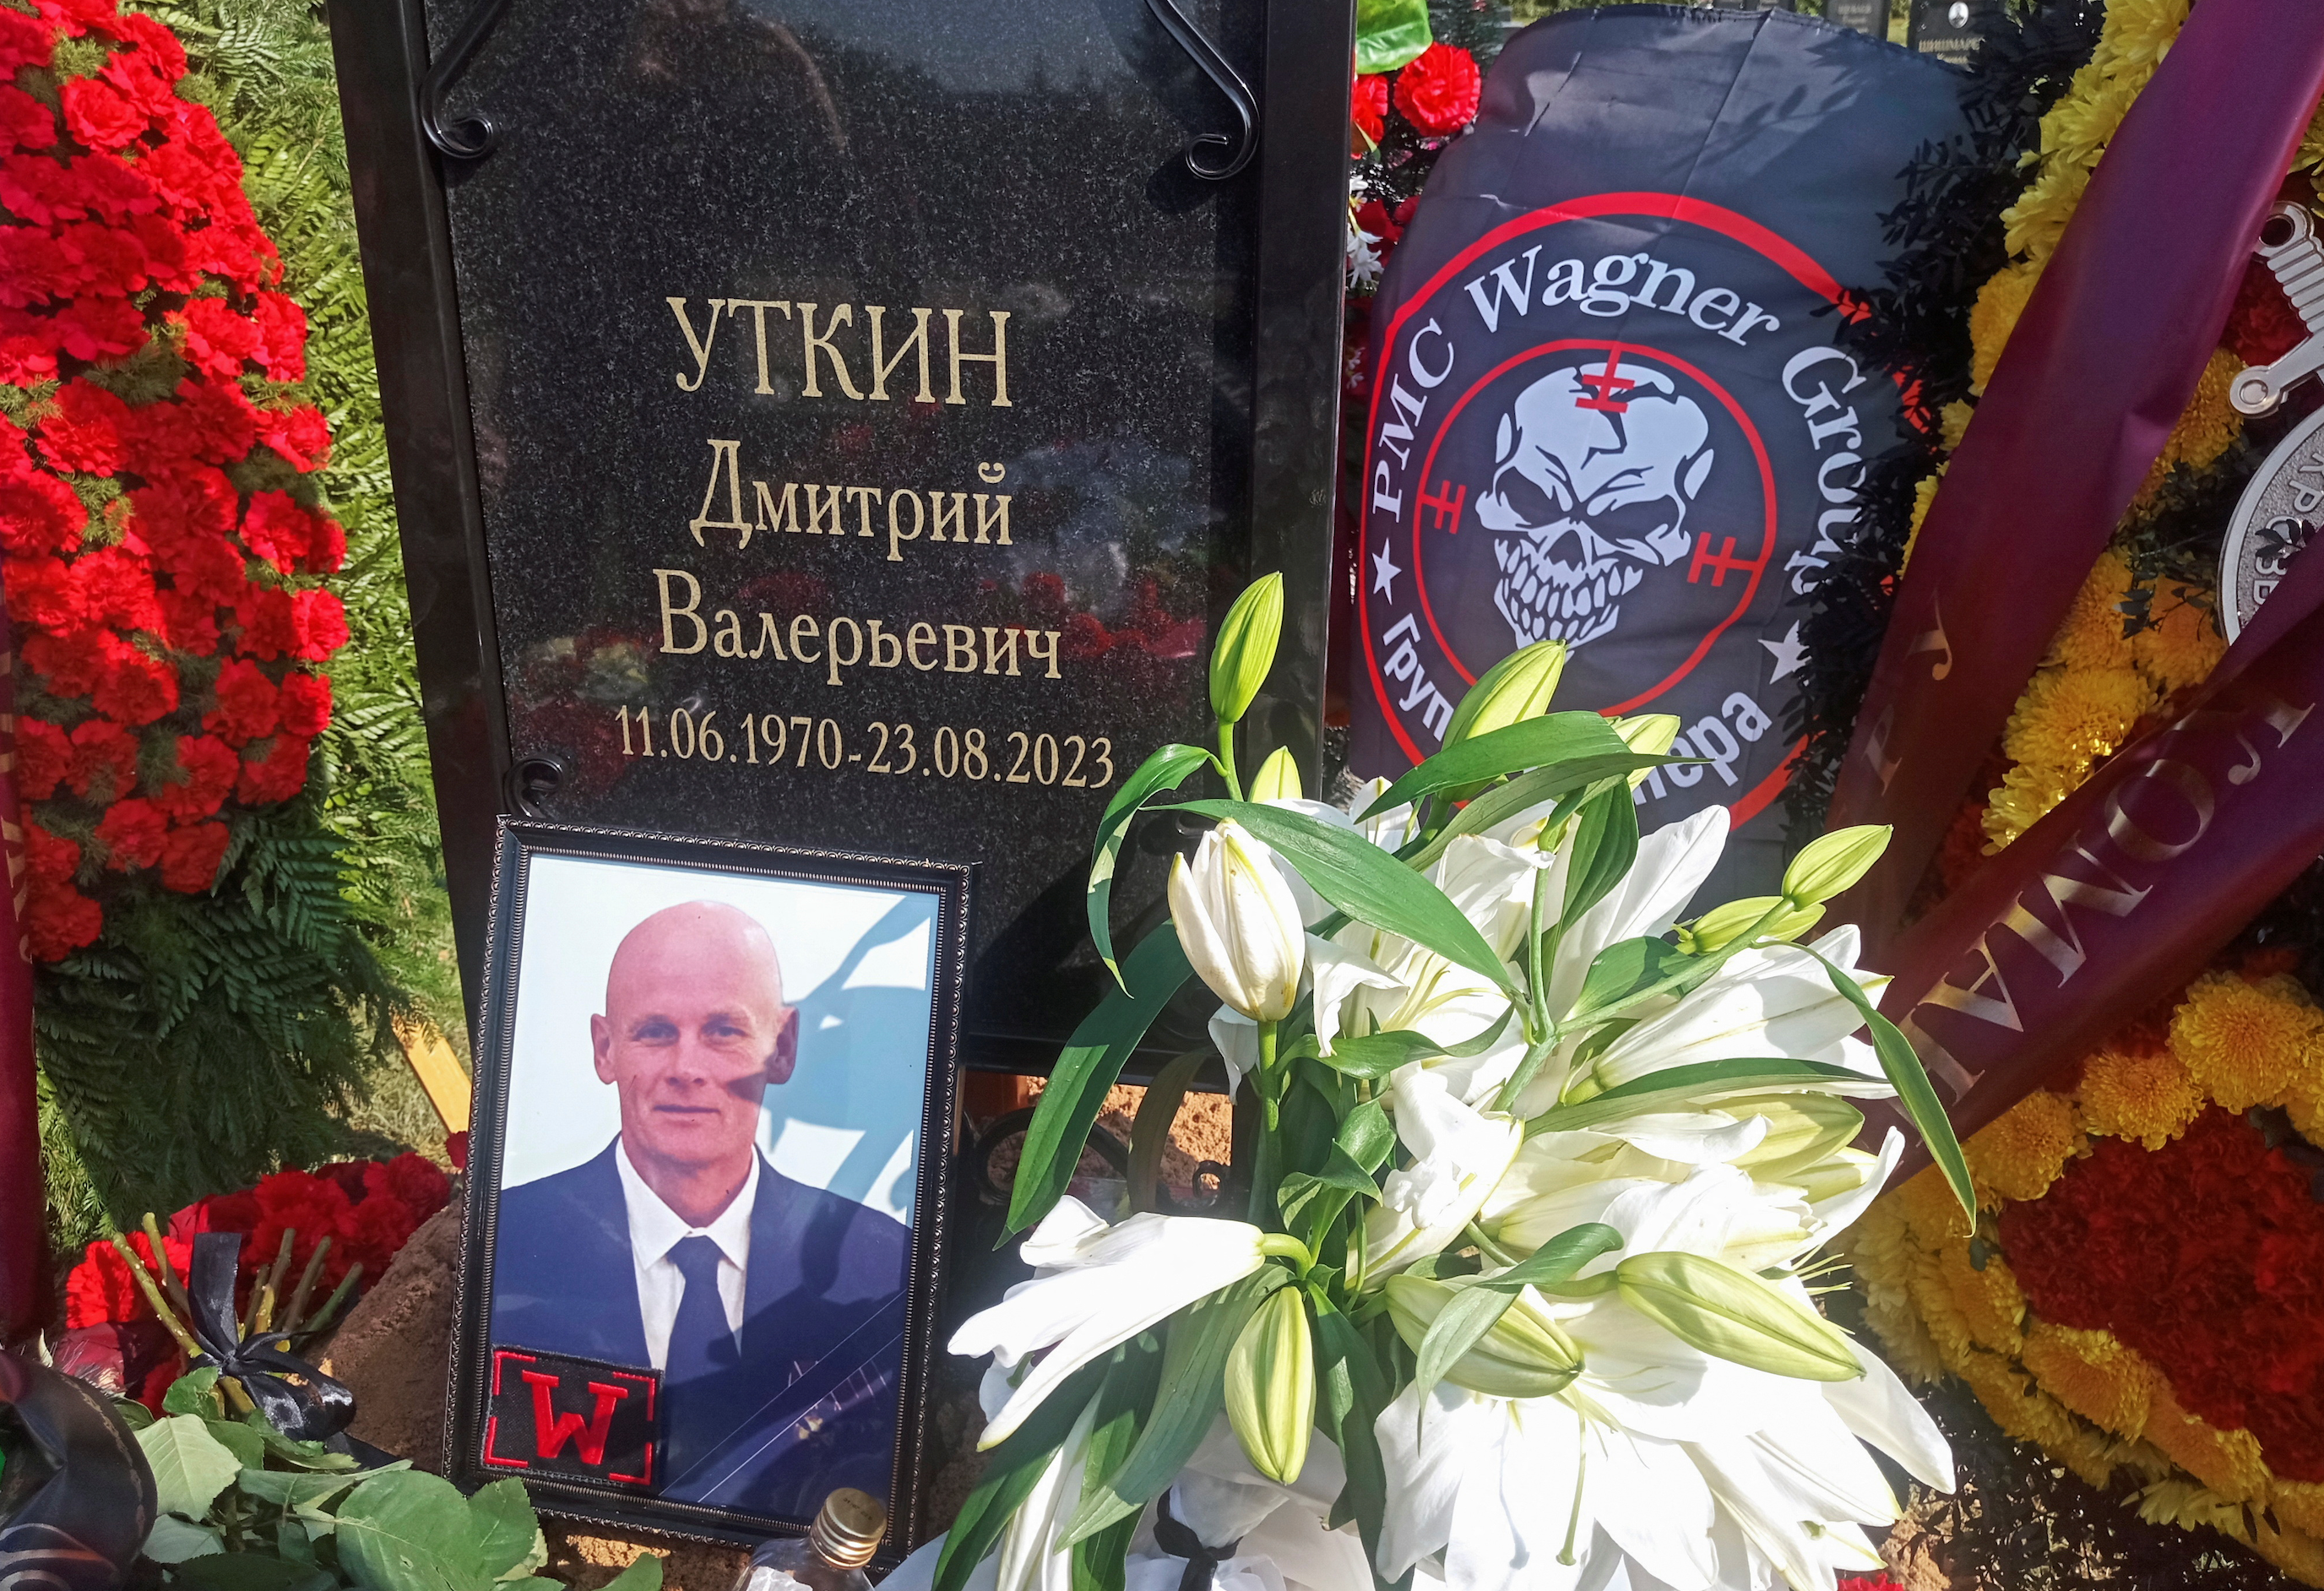 Wagner’s Utkin, right-hand man to Prigozhin, buried outside Moscow